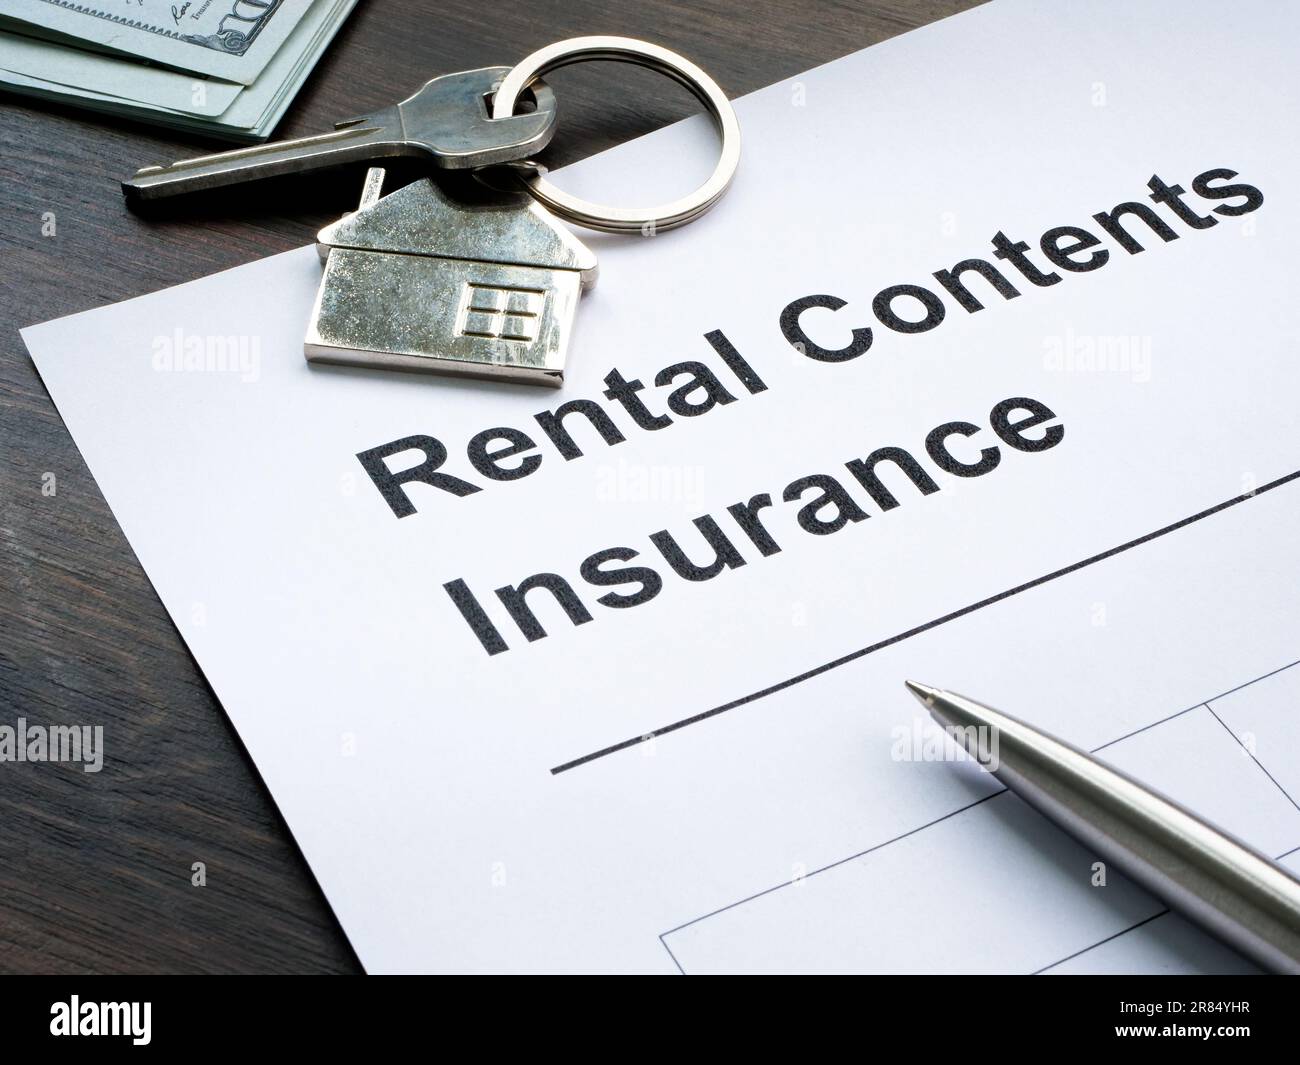 Rental contents insurance application form and key. Stock Photo